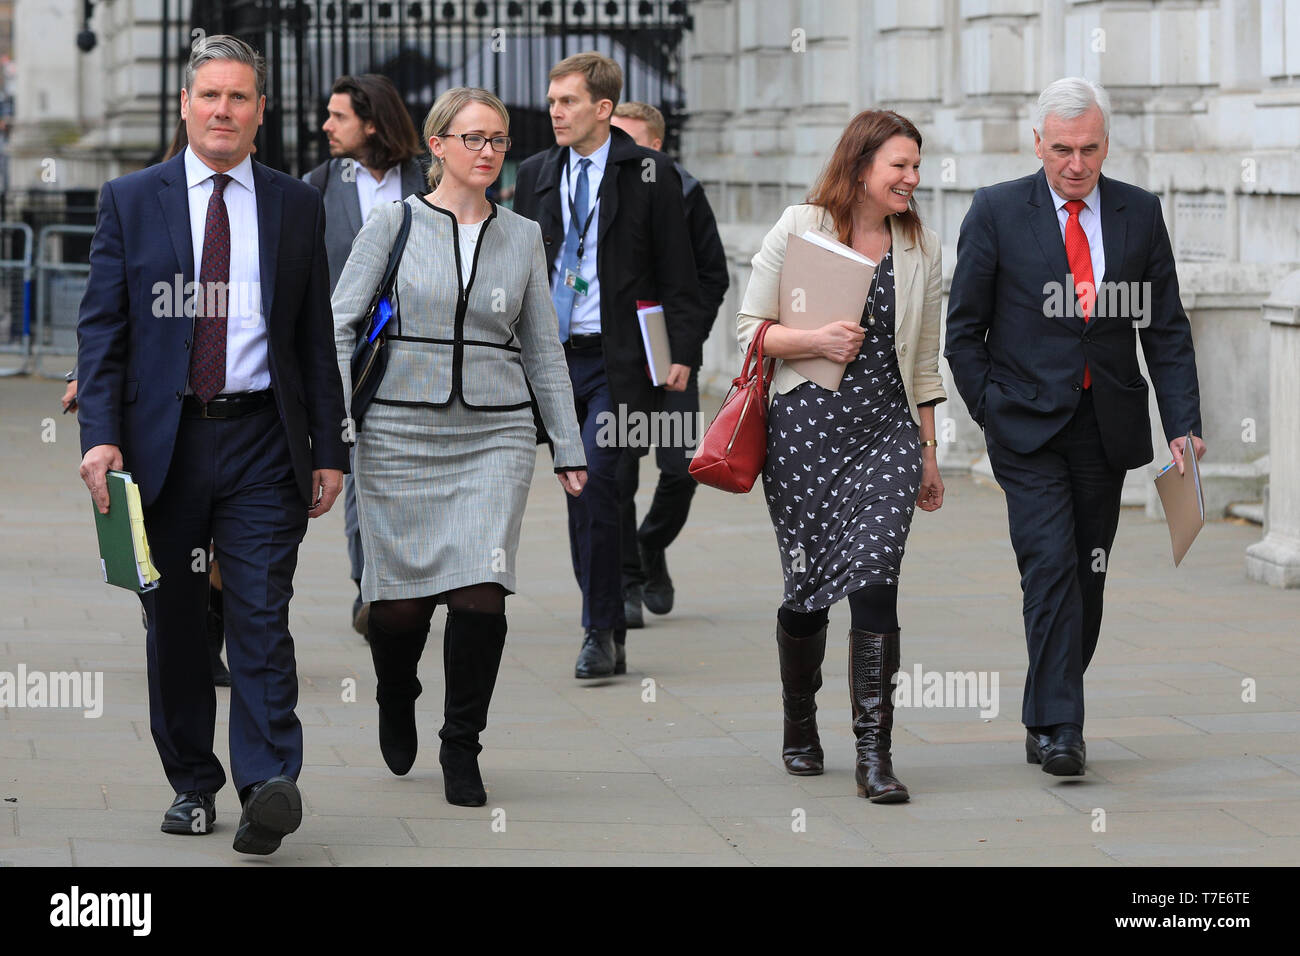 London, UK. 07th May, 2019. The Labour Party Brexit negotiating team on their way into the Cabinet Office in Westminster this afternoon. Left to right: Sir Keir Starmer, QC, MP, Shadow Secretary of State for Exiting the European Union, Shadow Business Secretary Rebecca Long-Bailey, MP, Shadow Environment Secretary Sue Hayman, MP, and John McDonnell, MP, Shadow Chancellor. Second row: Seumas Milne, strategic advisor. Credit: Imageplotter/Alamy Live News Stock Photo